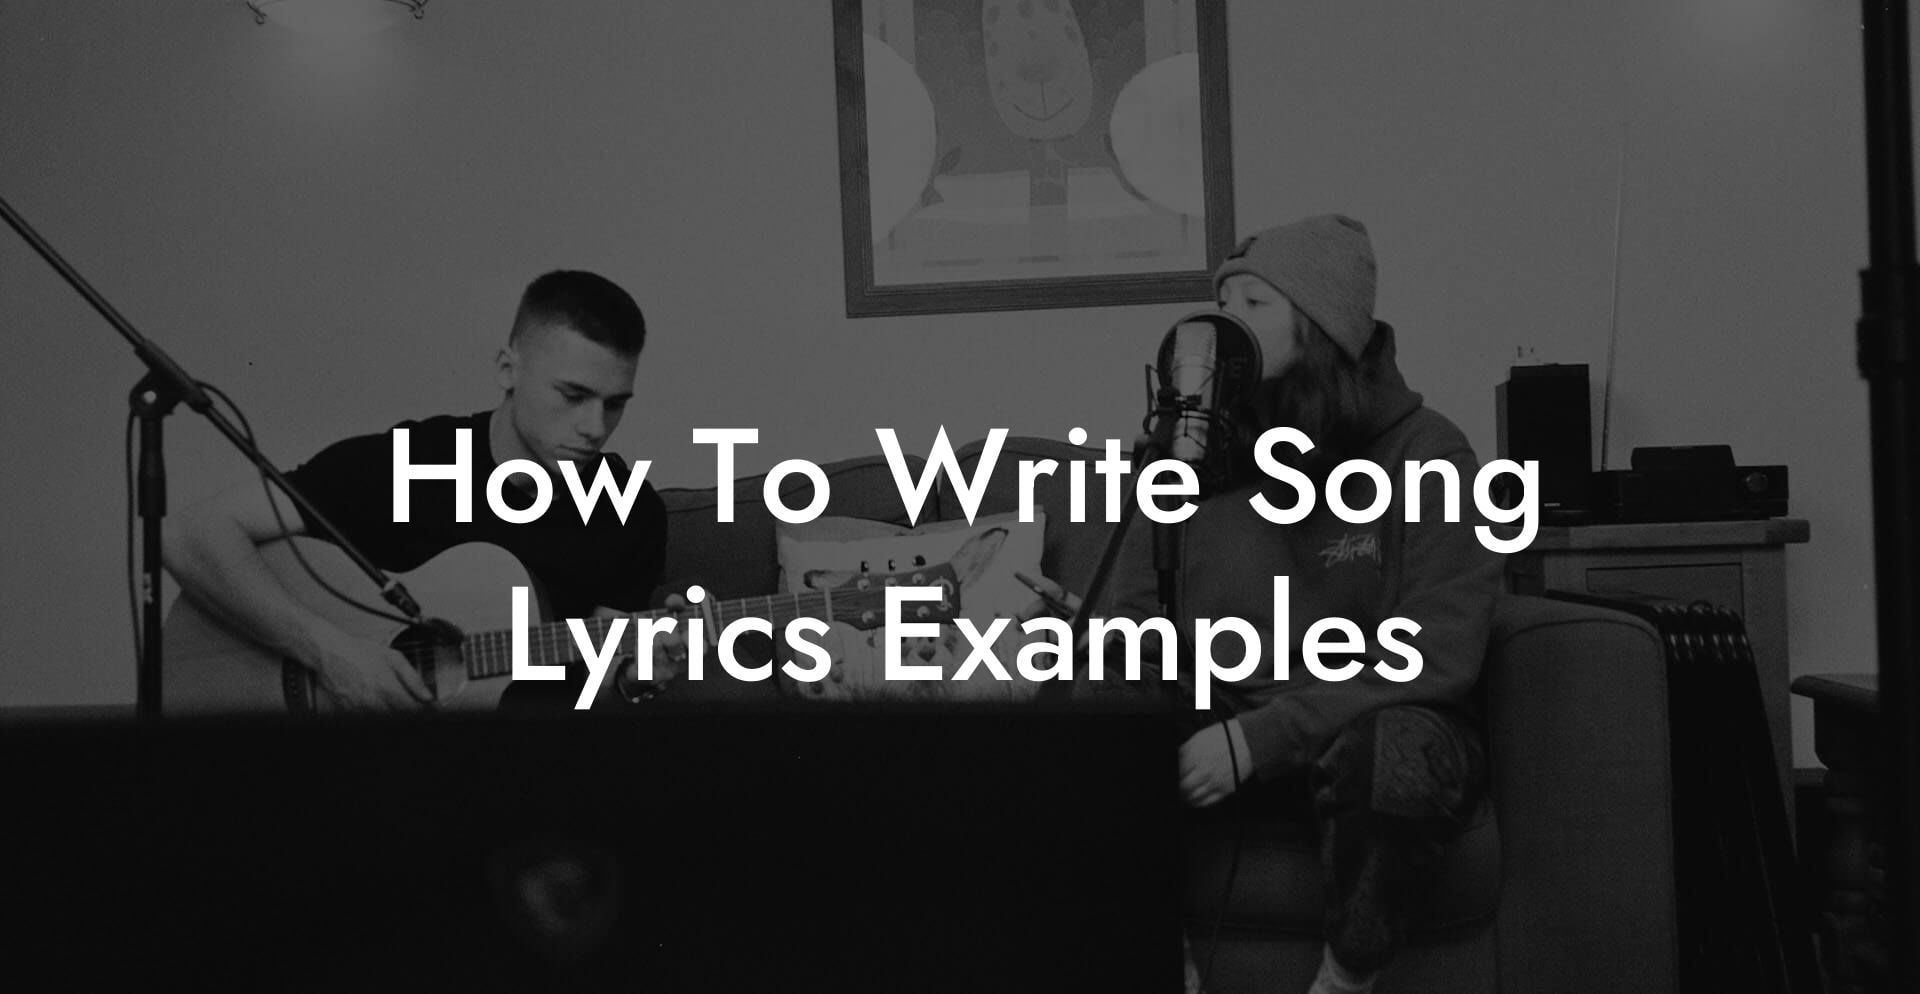 how to write song lyrics examples lyric assistant